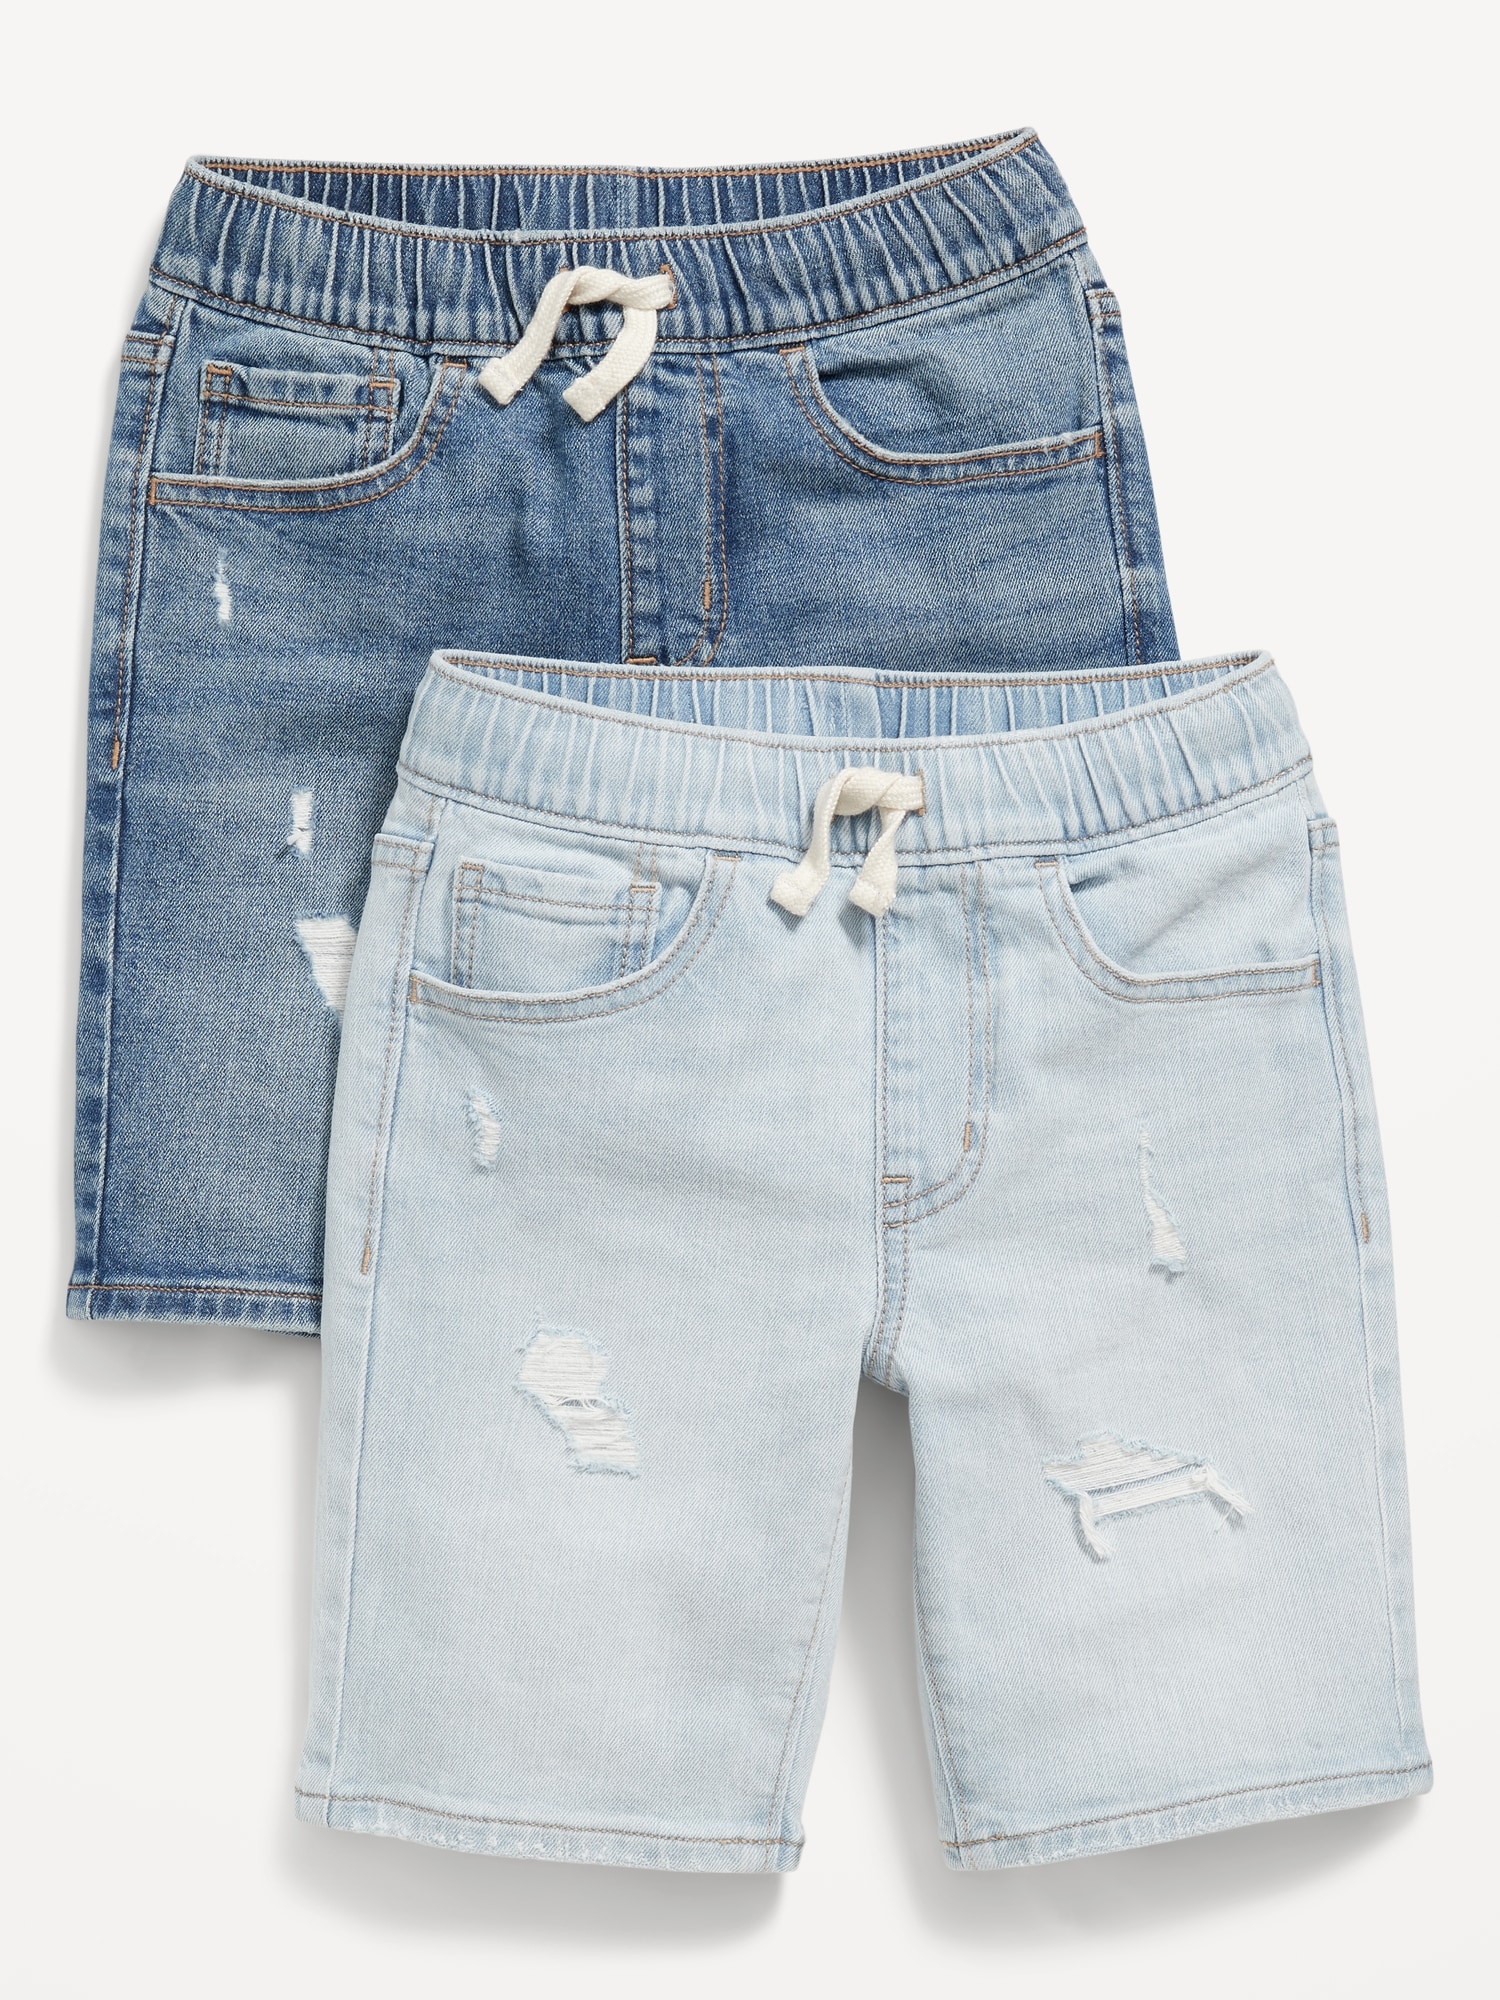 360 Stretch Pull-On Jean Shorts 2-Pack for Boys (At Knee